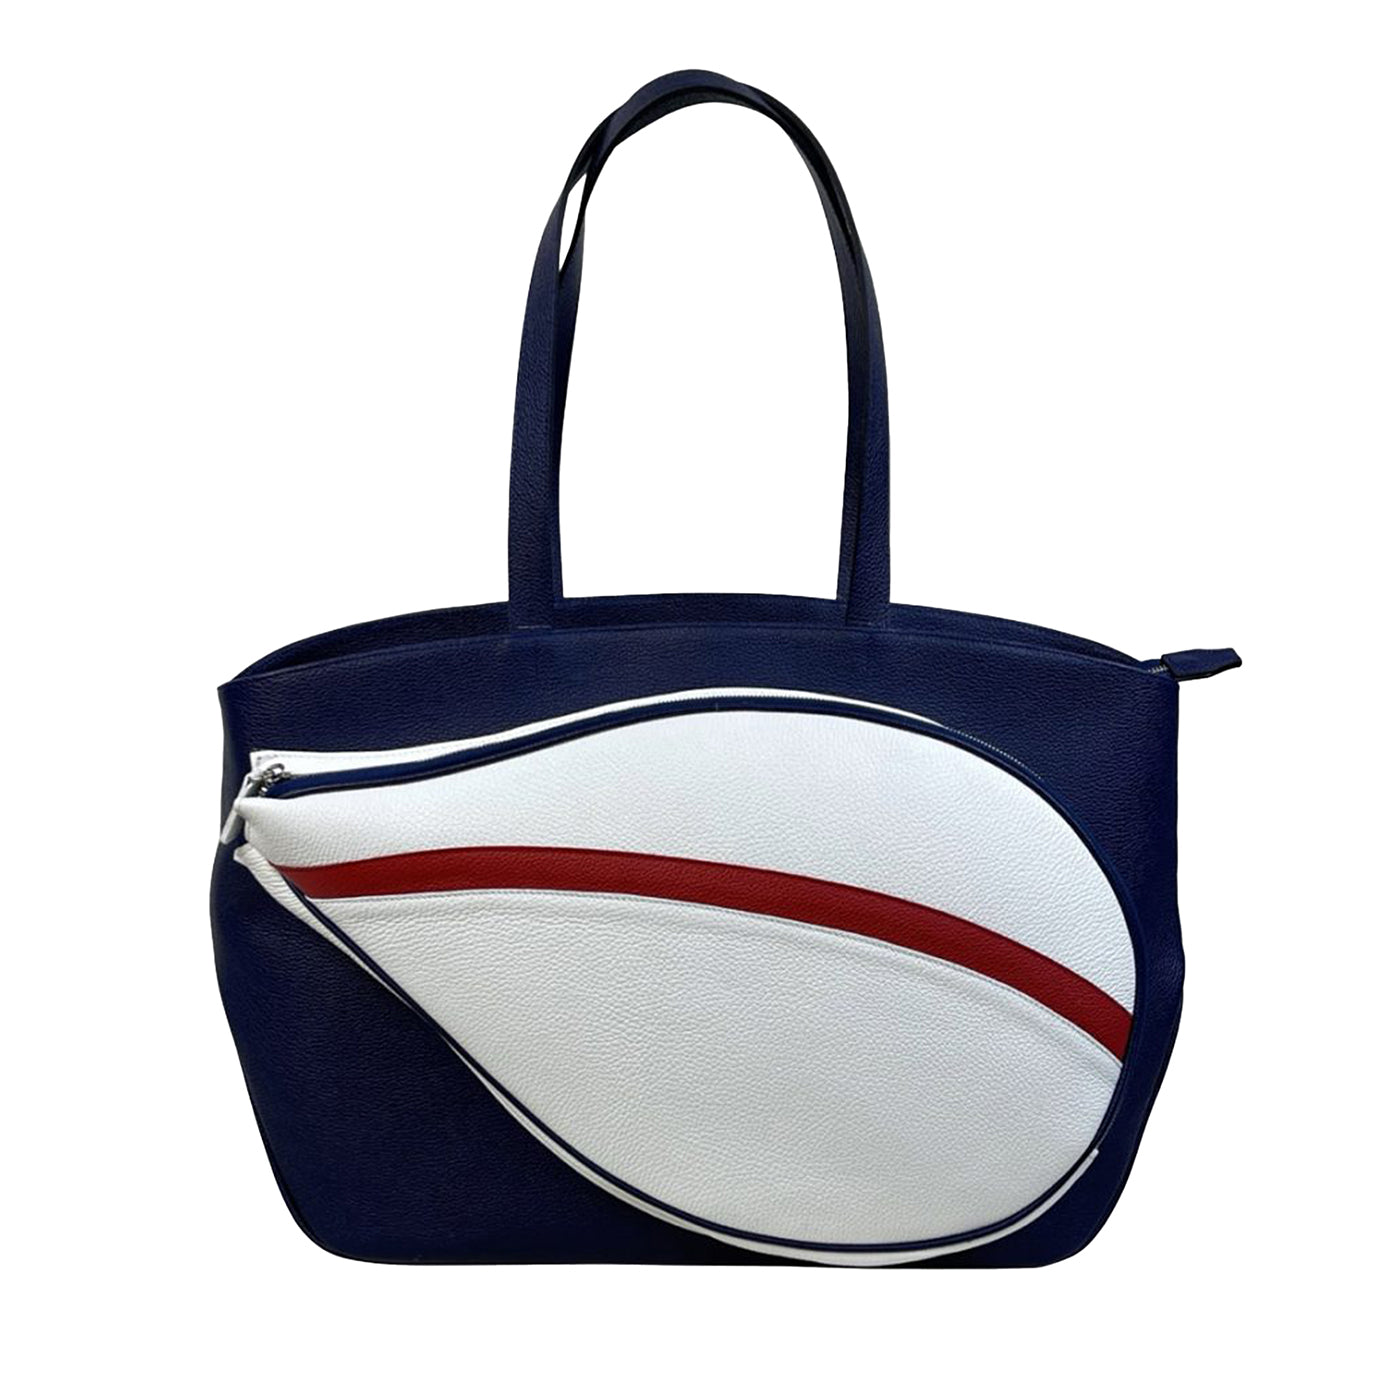 Sport Blue/Red/White Bag With Tennis-Racket-Shaped Pocket - Main view